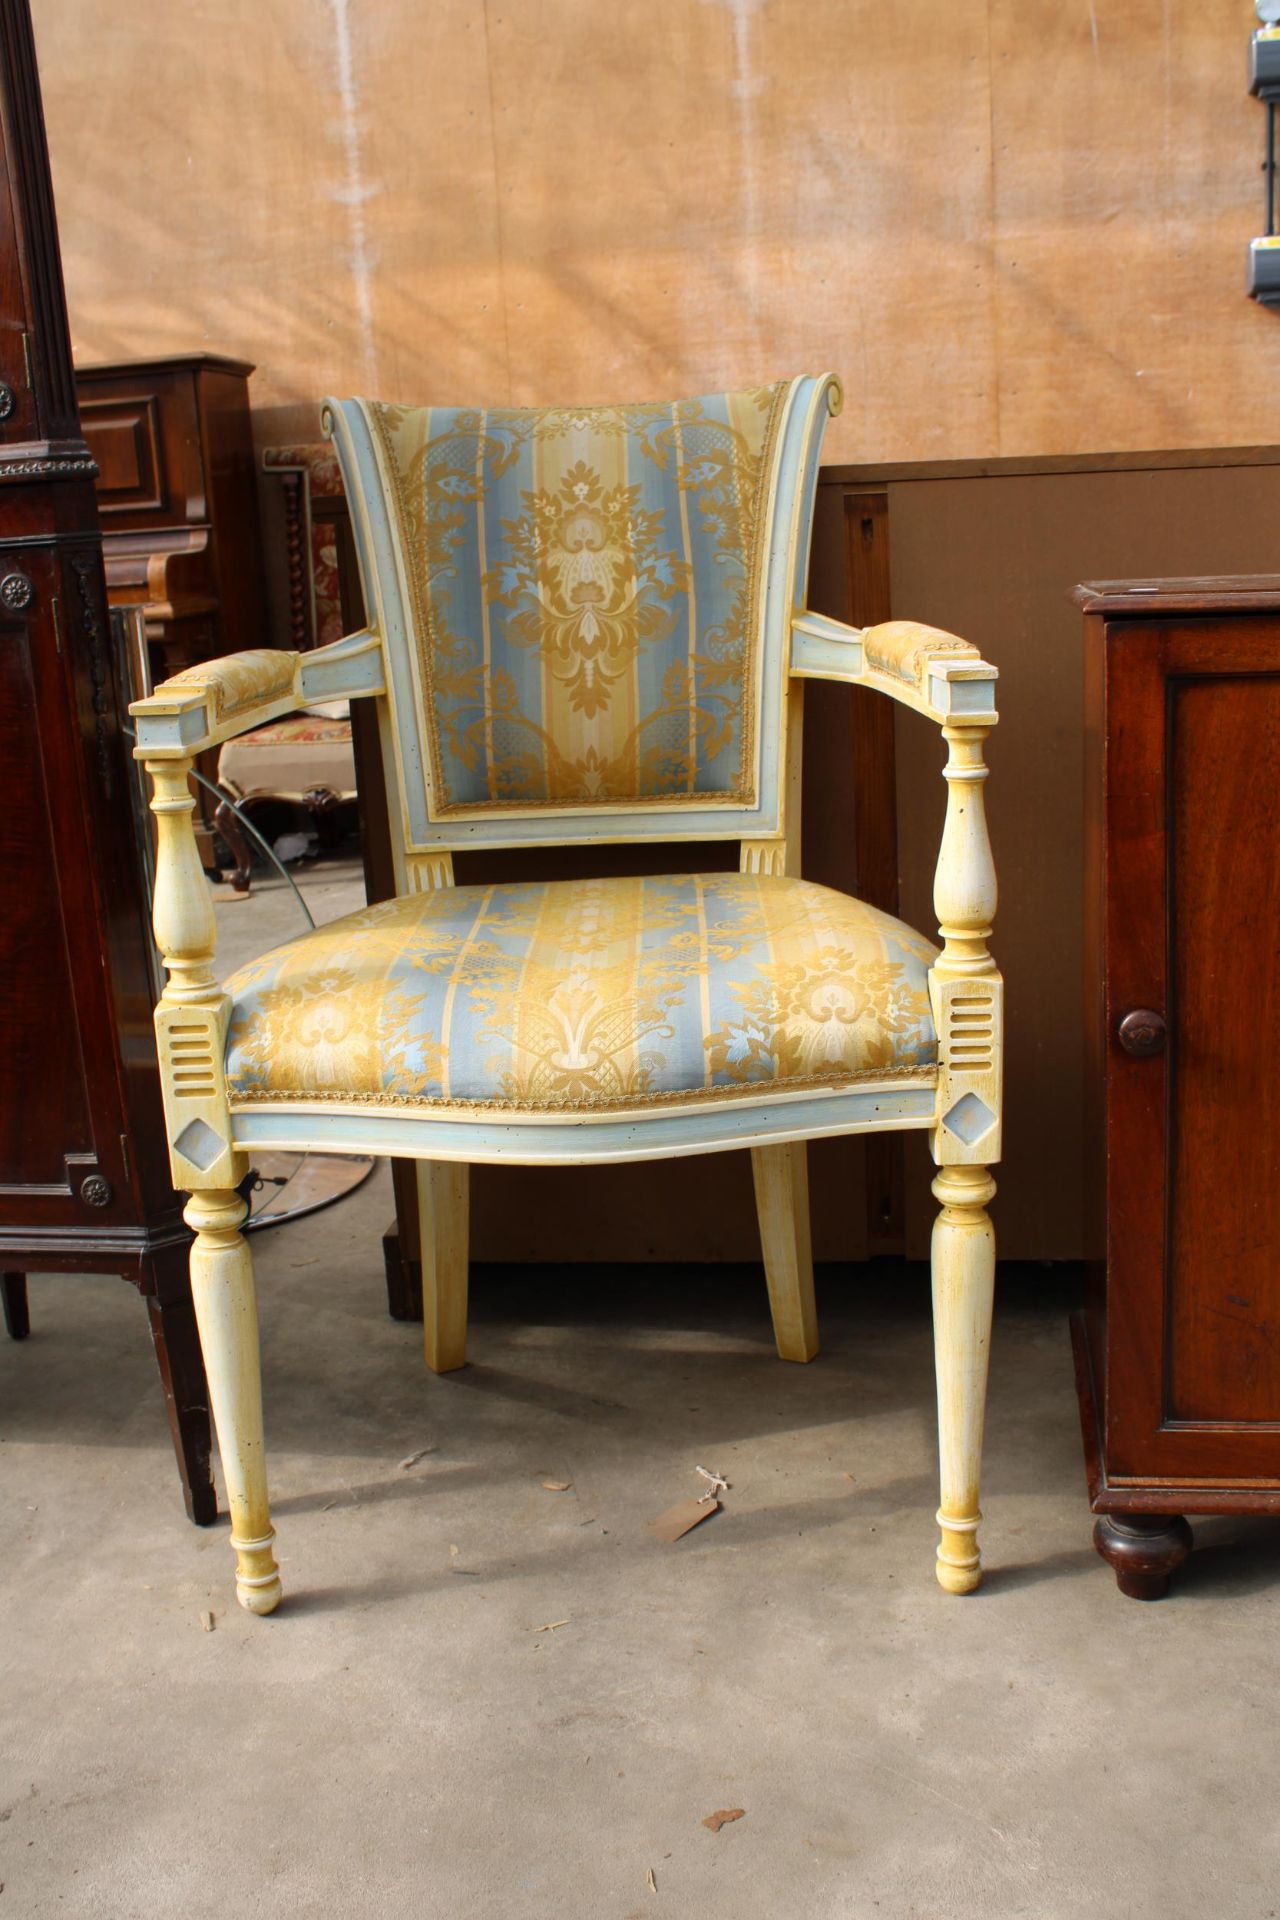 A CONTINETAL 19TH CENTURY STYLE OPEN ARMCHAIR WITH TURNED LEGS AND UPRIGHTS - Image 2 of 3